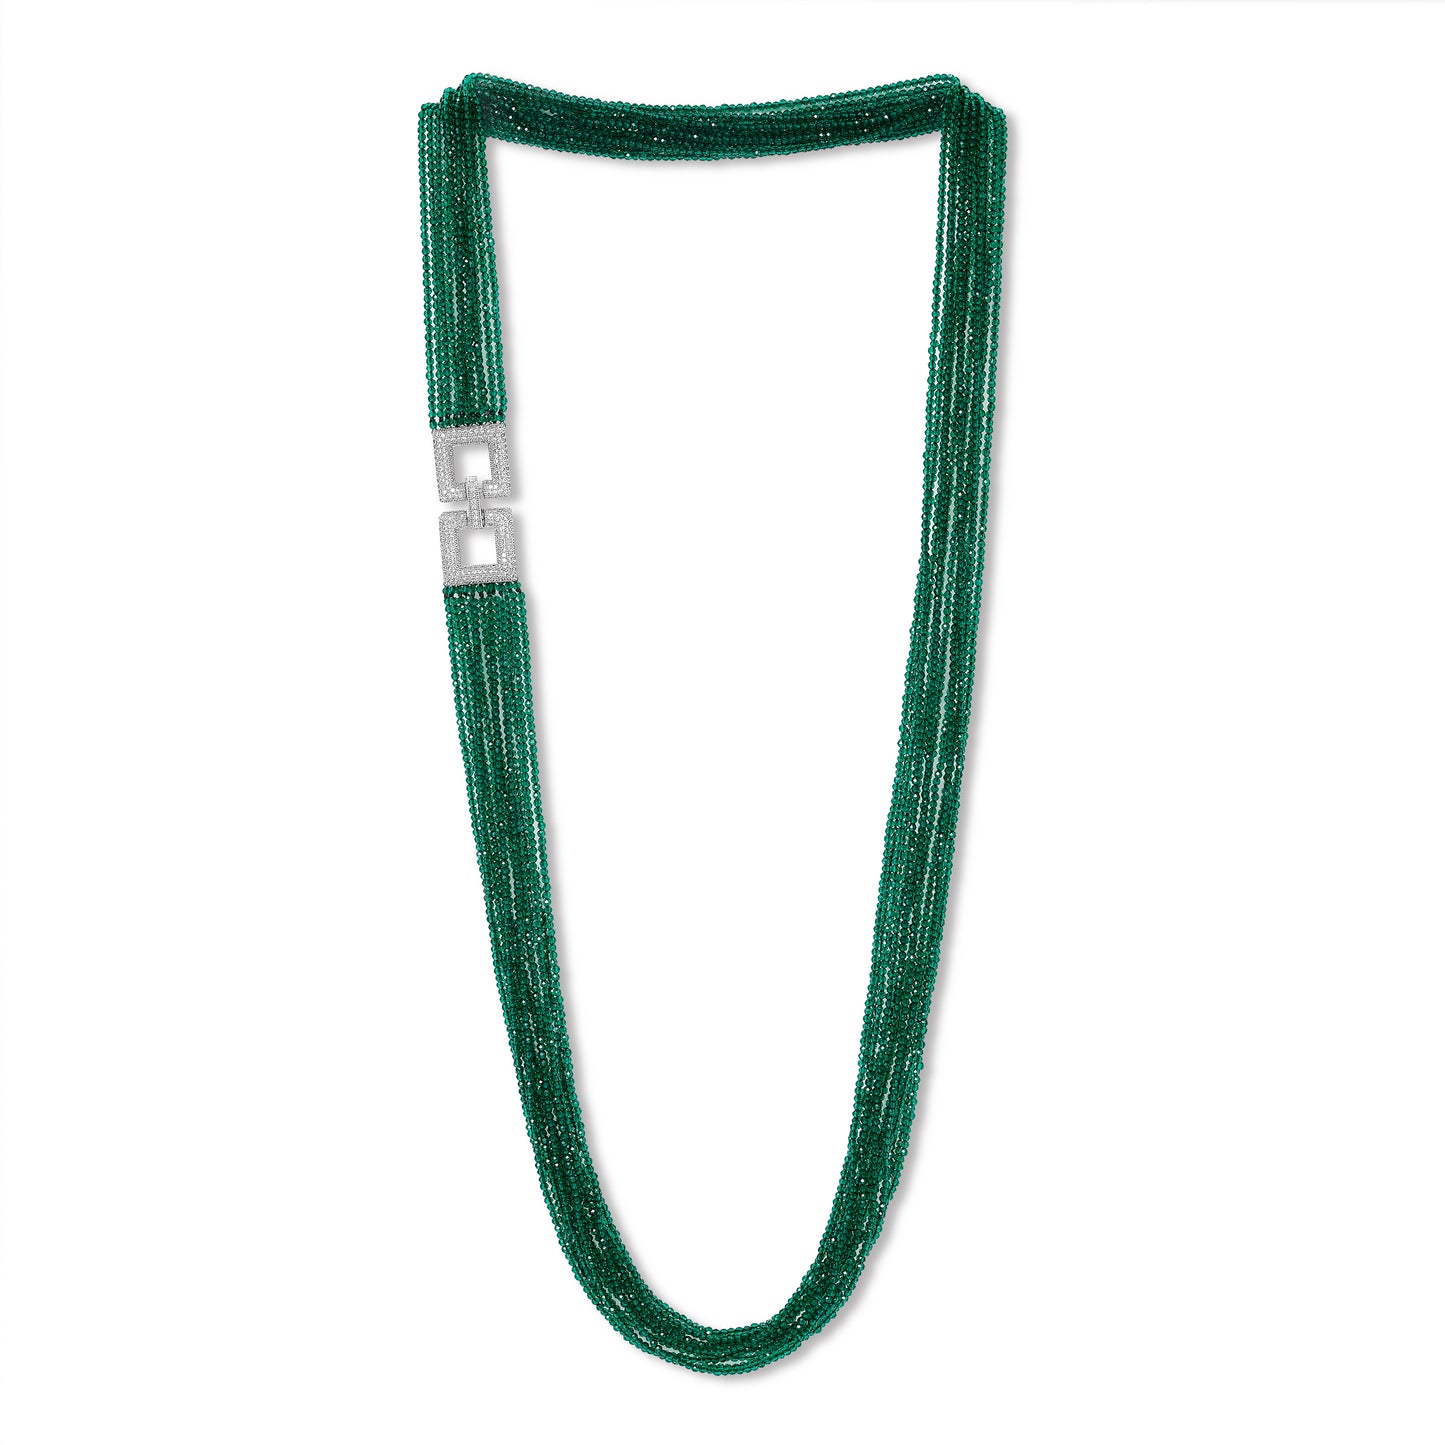 Clara fine green crystal multi-strand necklace with pave feature clasp